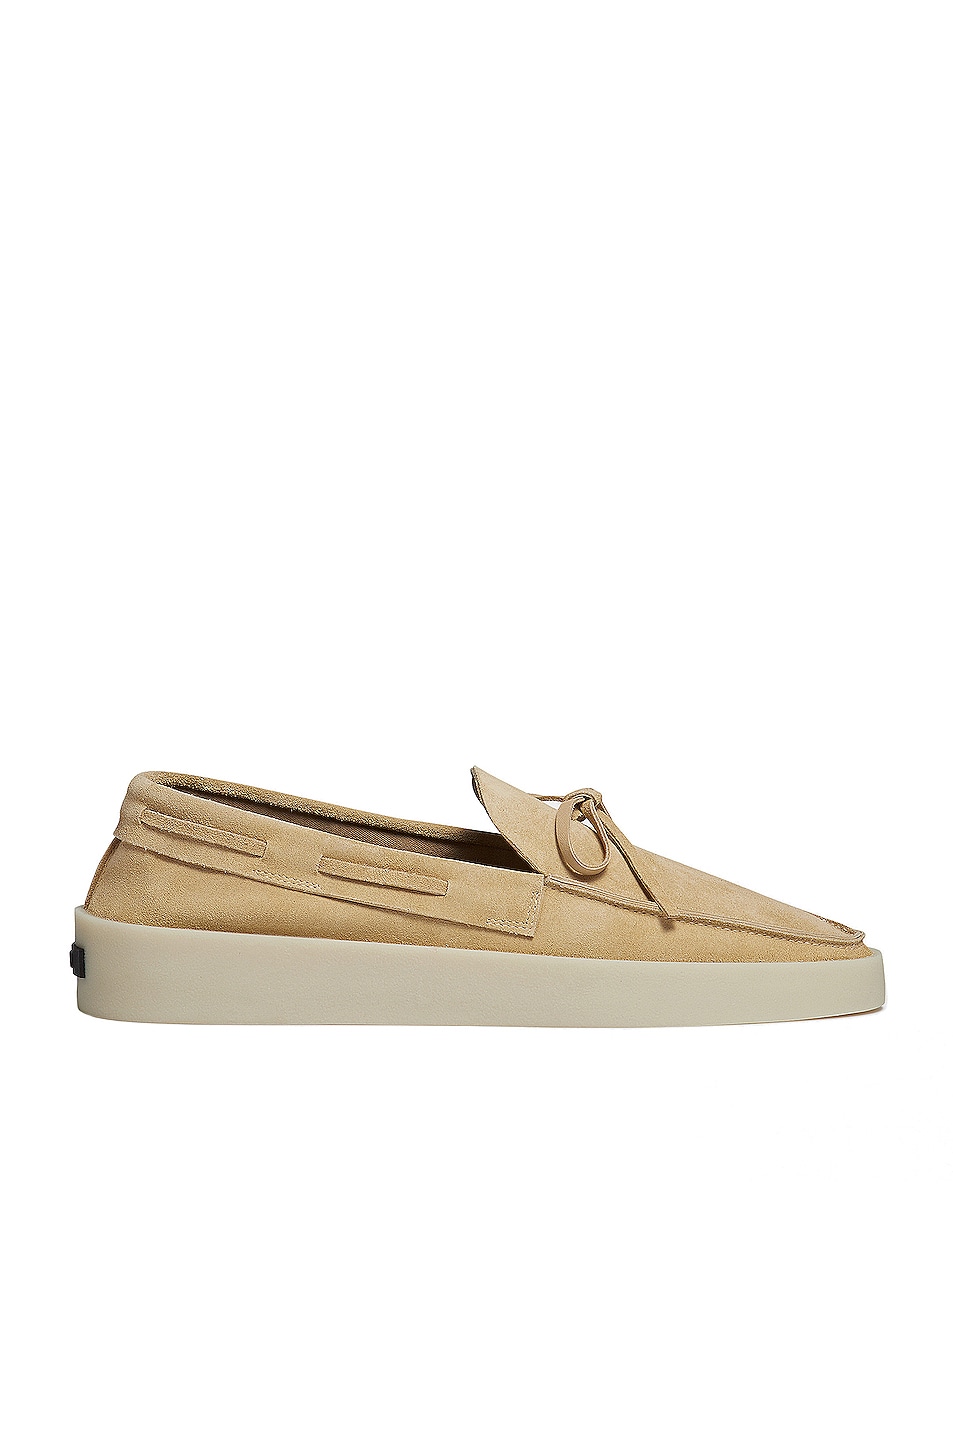 Image 1 of Fear of God Exclusively for Ermenegildo Zegna Suede Leather Driving Loafer in Camel